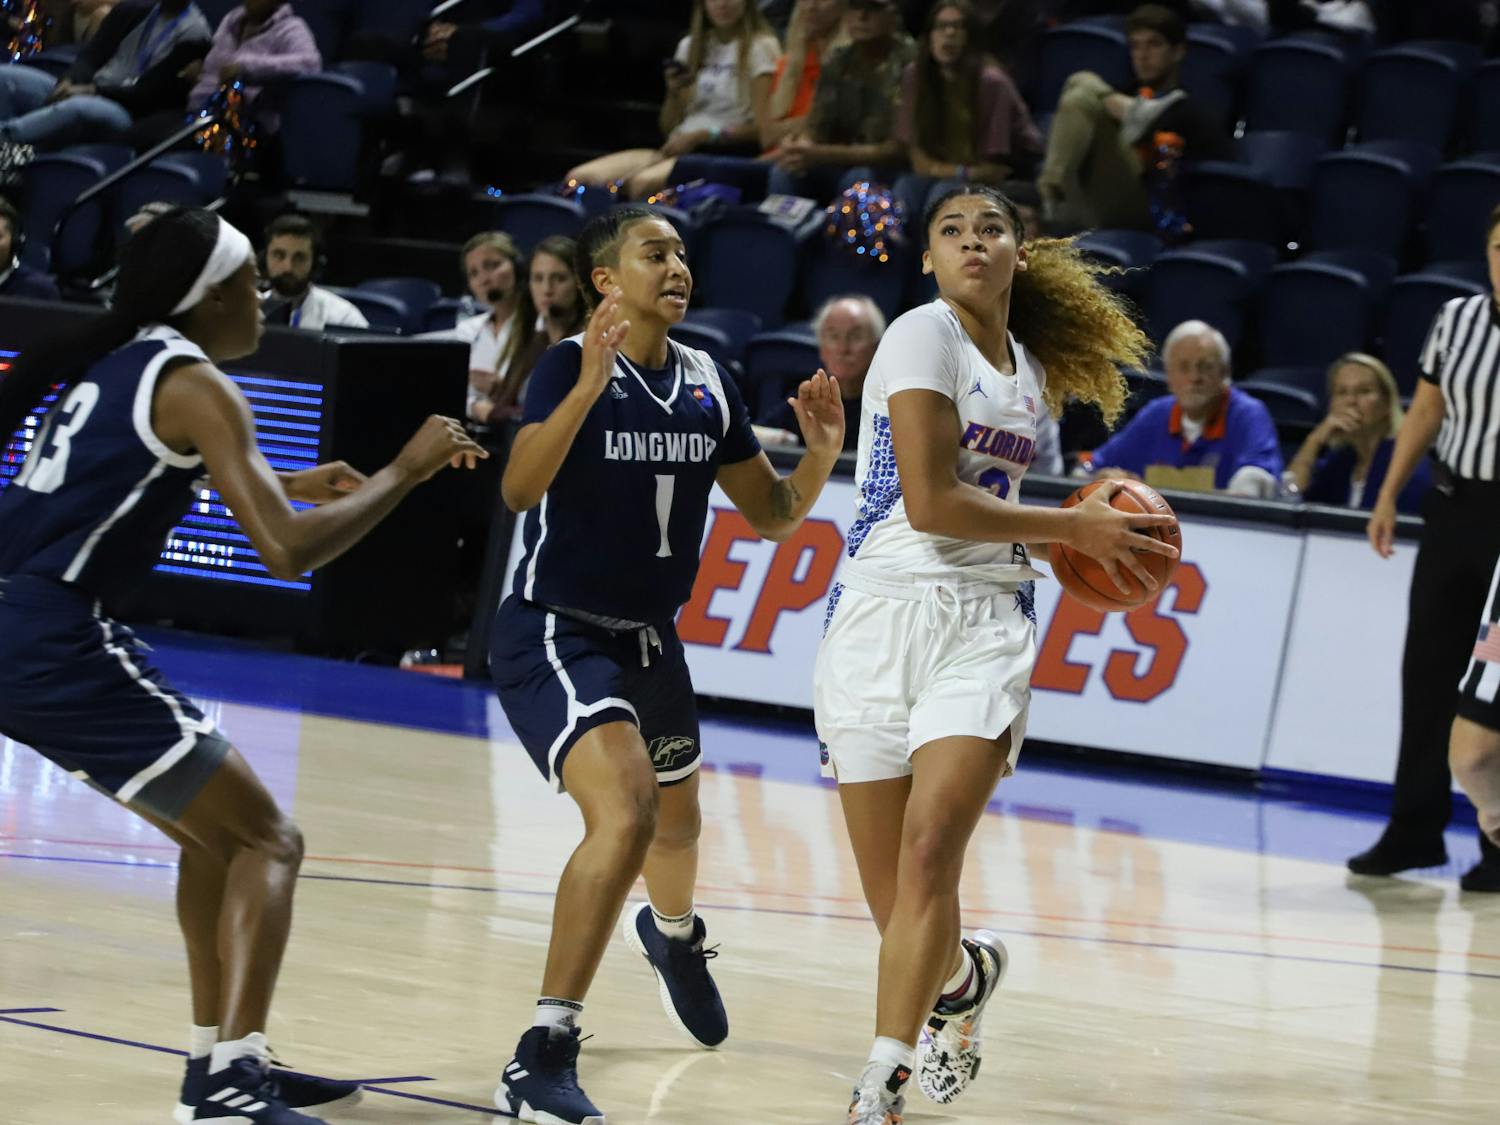 Lavender Briggs showed an early surge of energy she lacked Jan. 3 against Texas A&M. Photo from UF-Longwood game in November 2019.